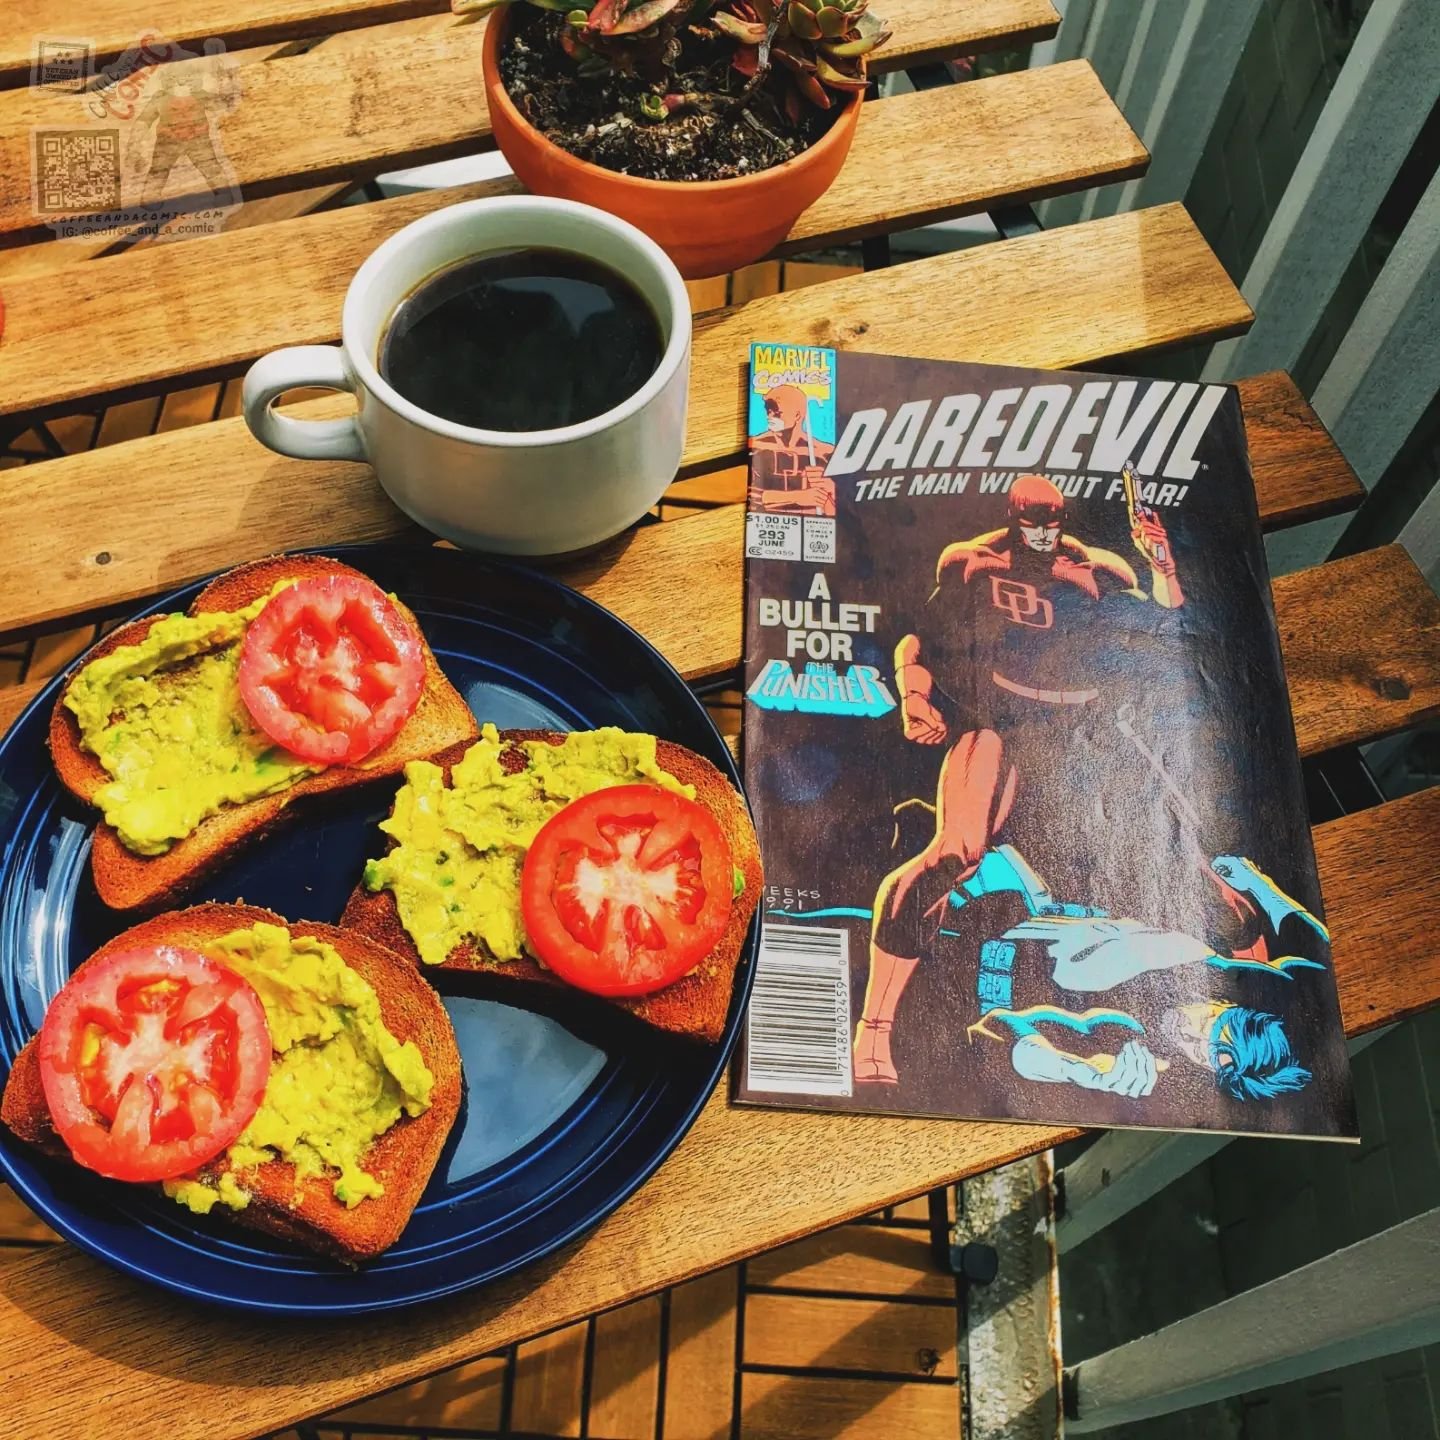 Today's coffee ☕ and a comic 📓 is Daredevil #293
👊 Brace yourself for a pulse-pounding showdown! 👊

With cover art by the legendary Lee Weeks, this issue delivers non-stop action and suspense! 💥

In &quot;Murder By Numbers,&quot; written by D. G.